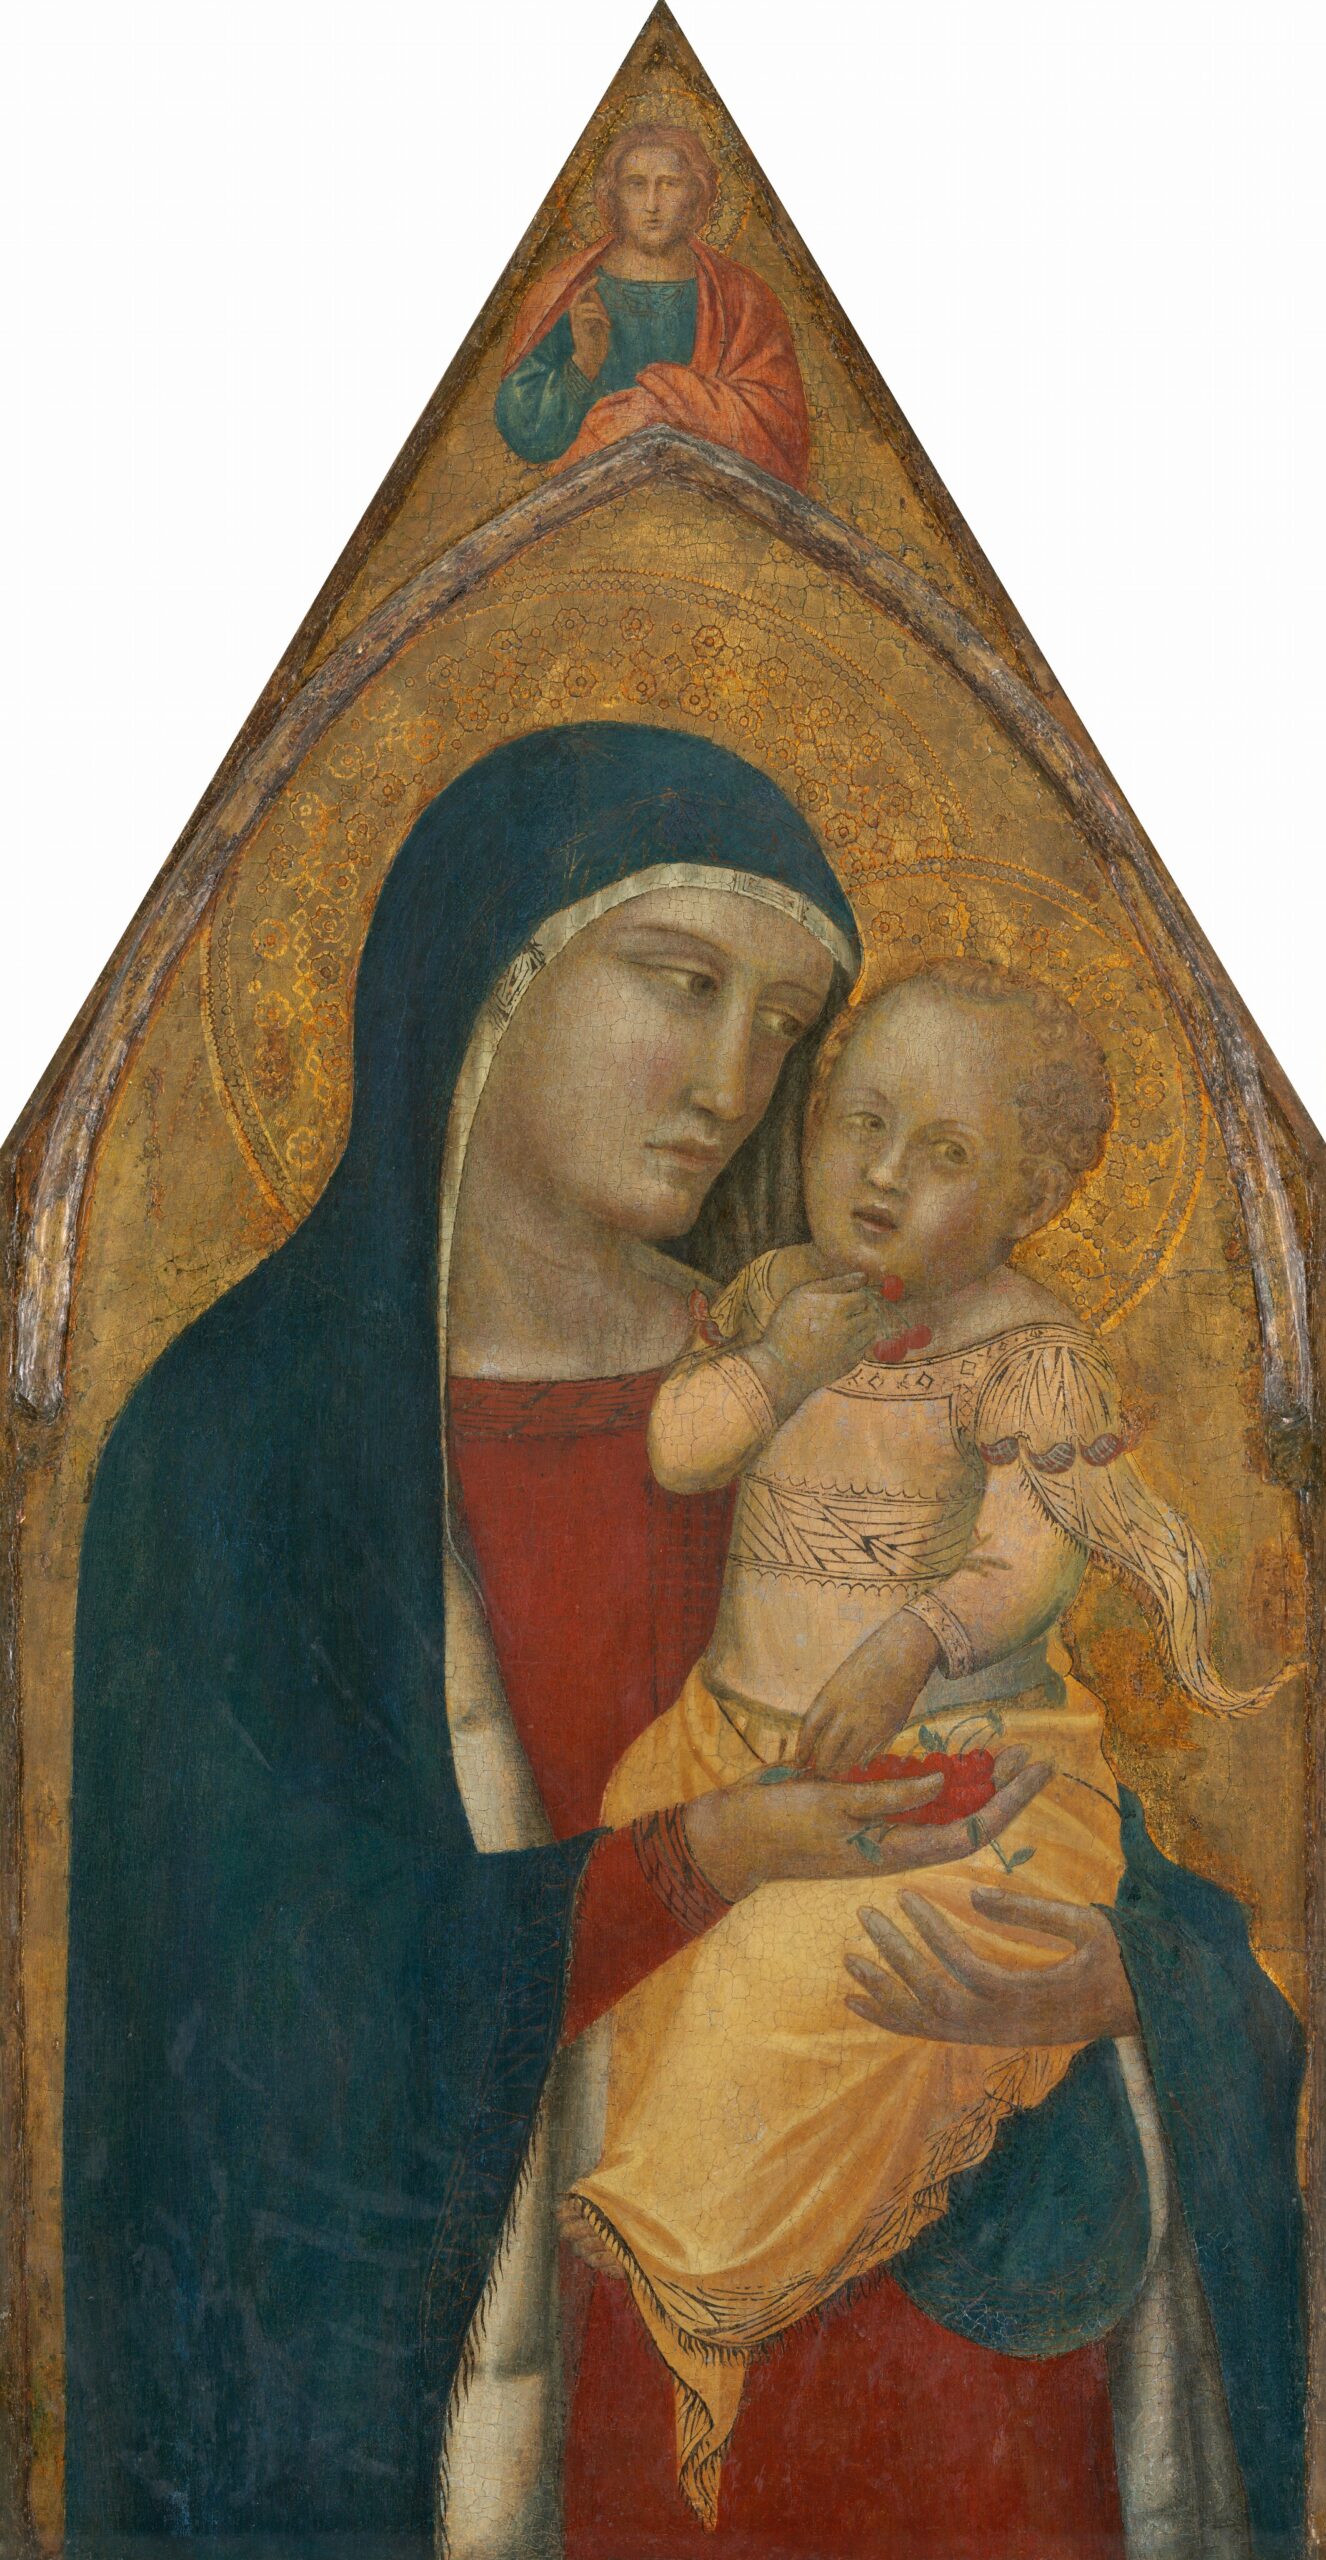 Madonna is seen holding a baby Jesus.